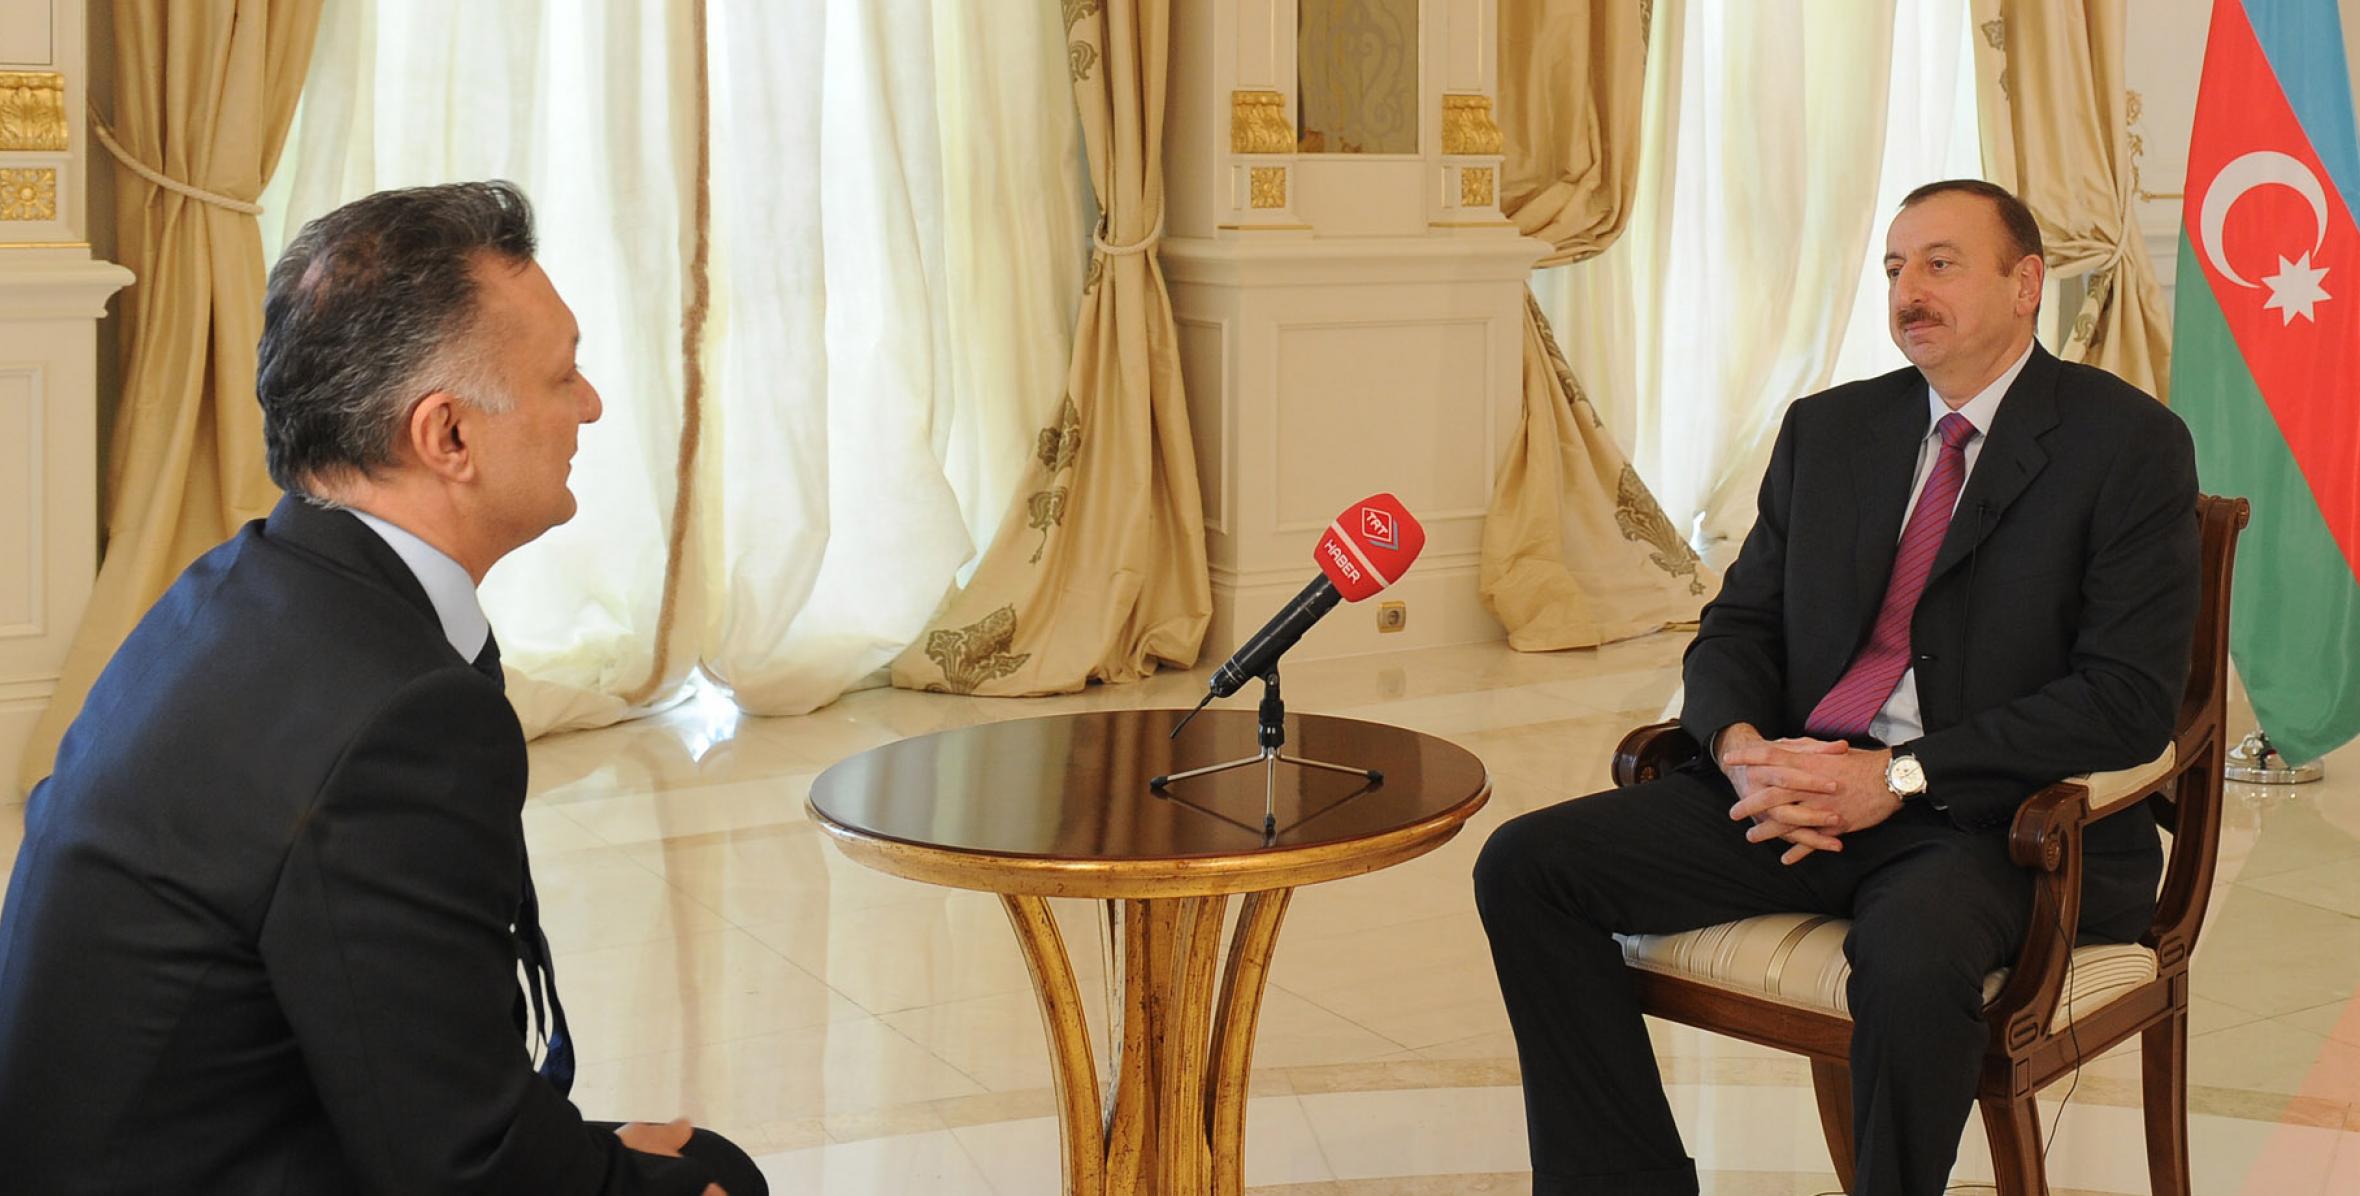 Ilham Aliyev was interviewed by the Baku representative of the Turkish television channel TRT, Yuksel Degercan